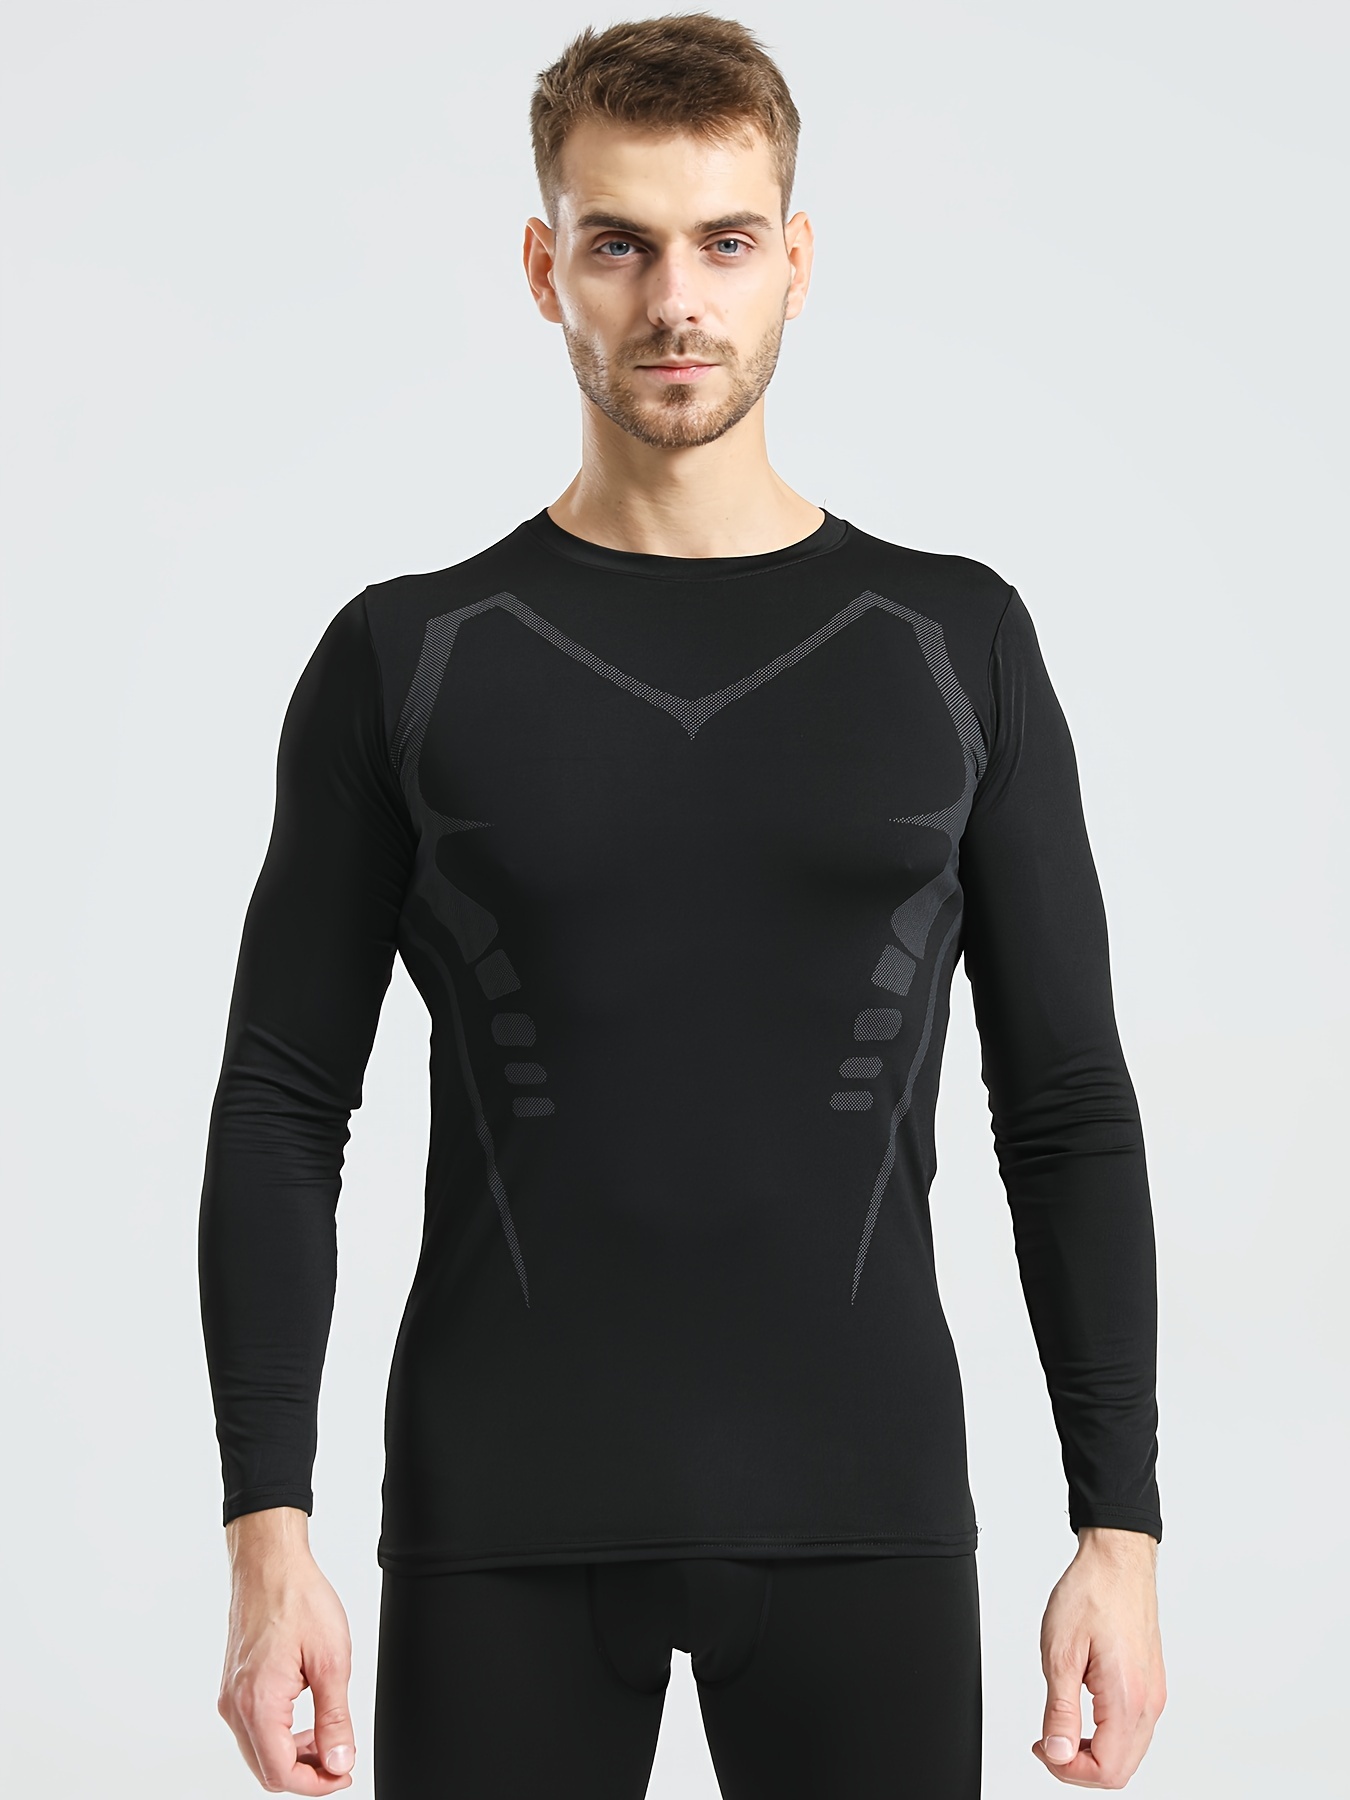 Mens Compression Shirt Wicking Training Base Layer Gym Long Sleeve Top Mock  Neck